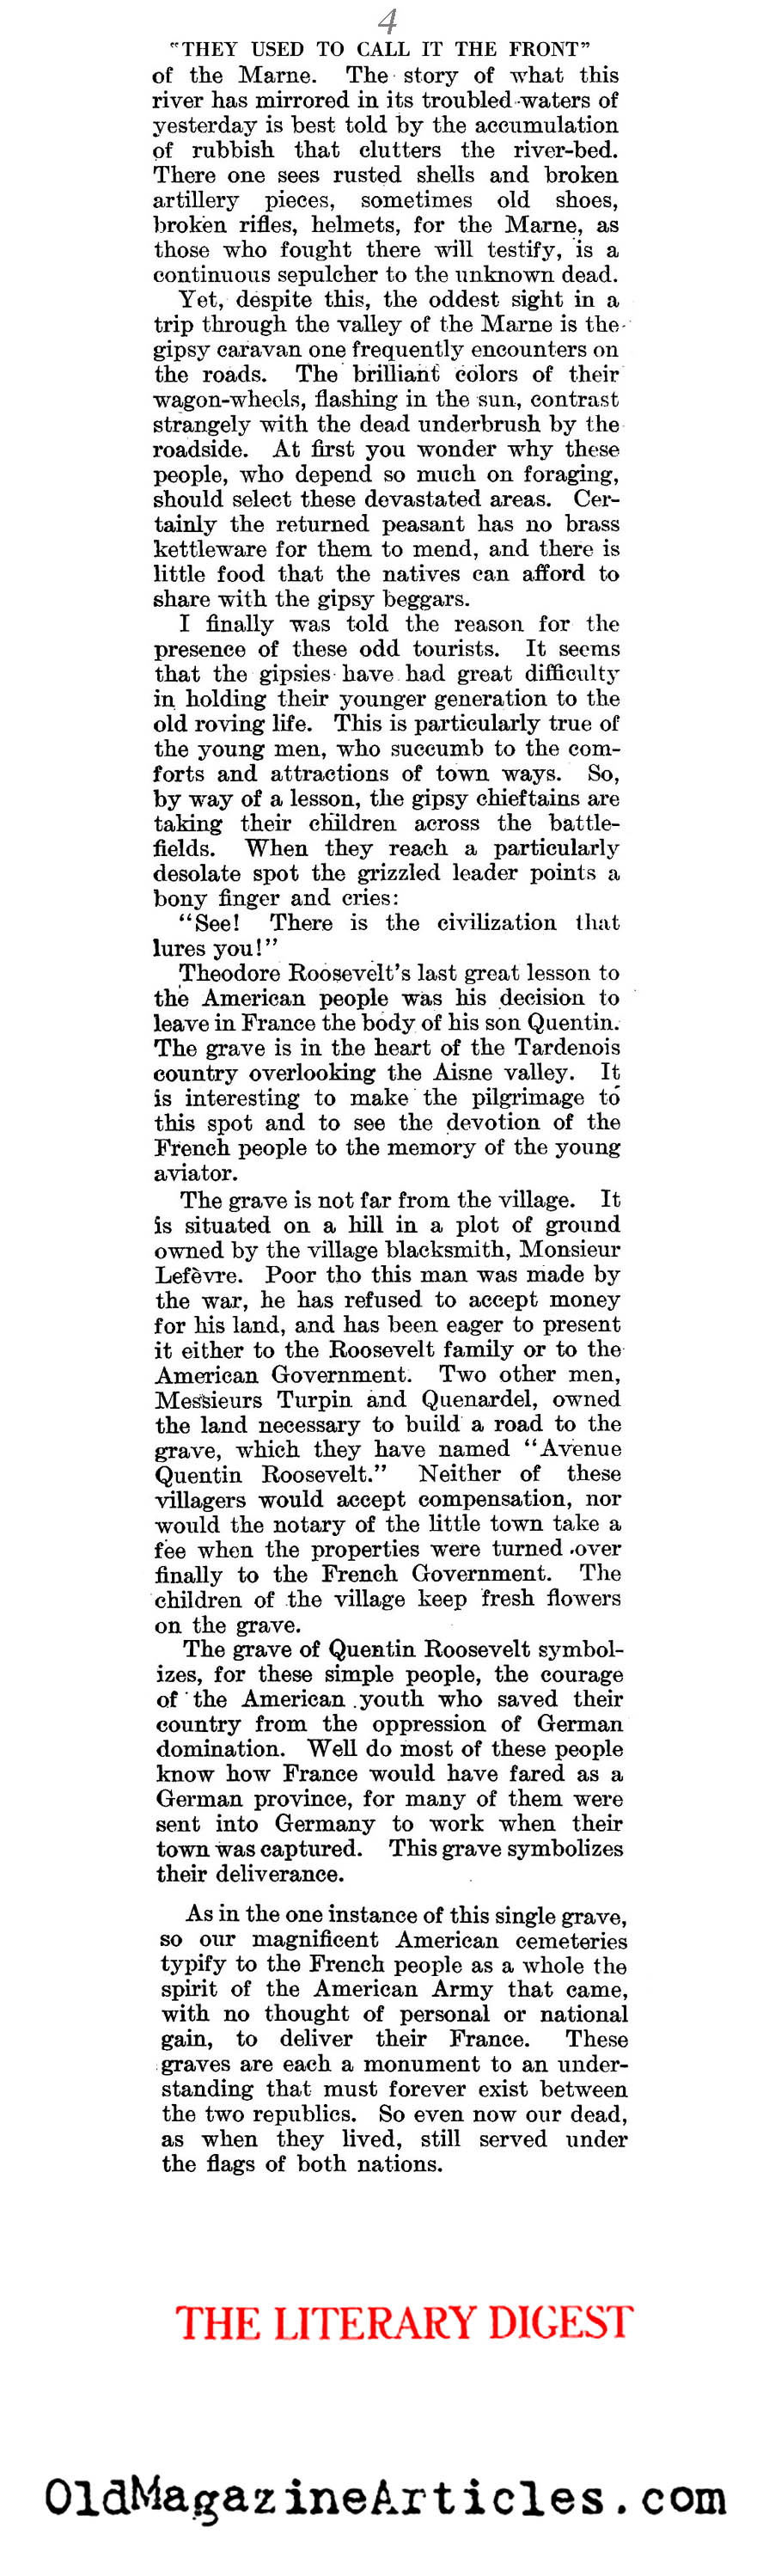 They Used to Call It the Front (The Literary Digest, 1921)